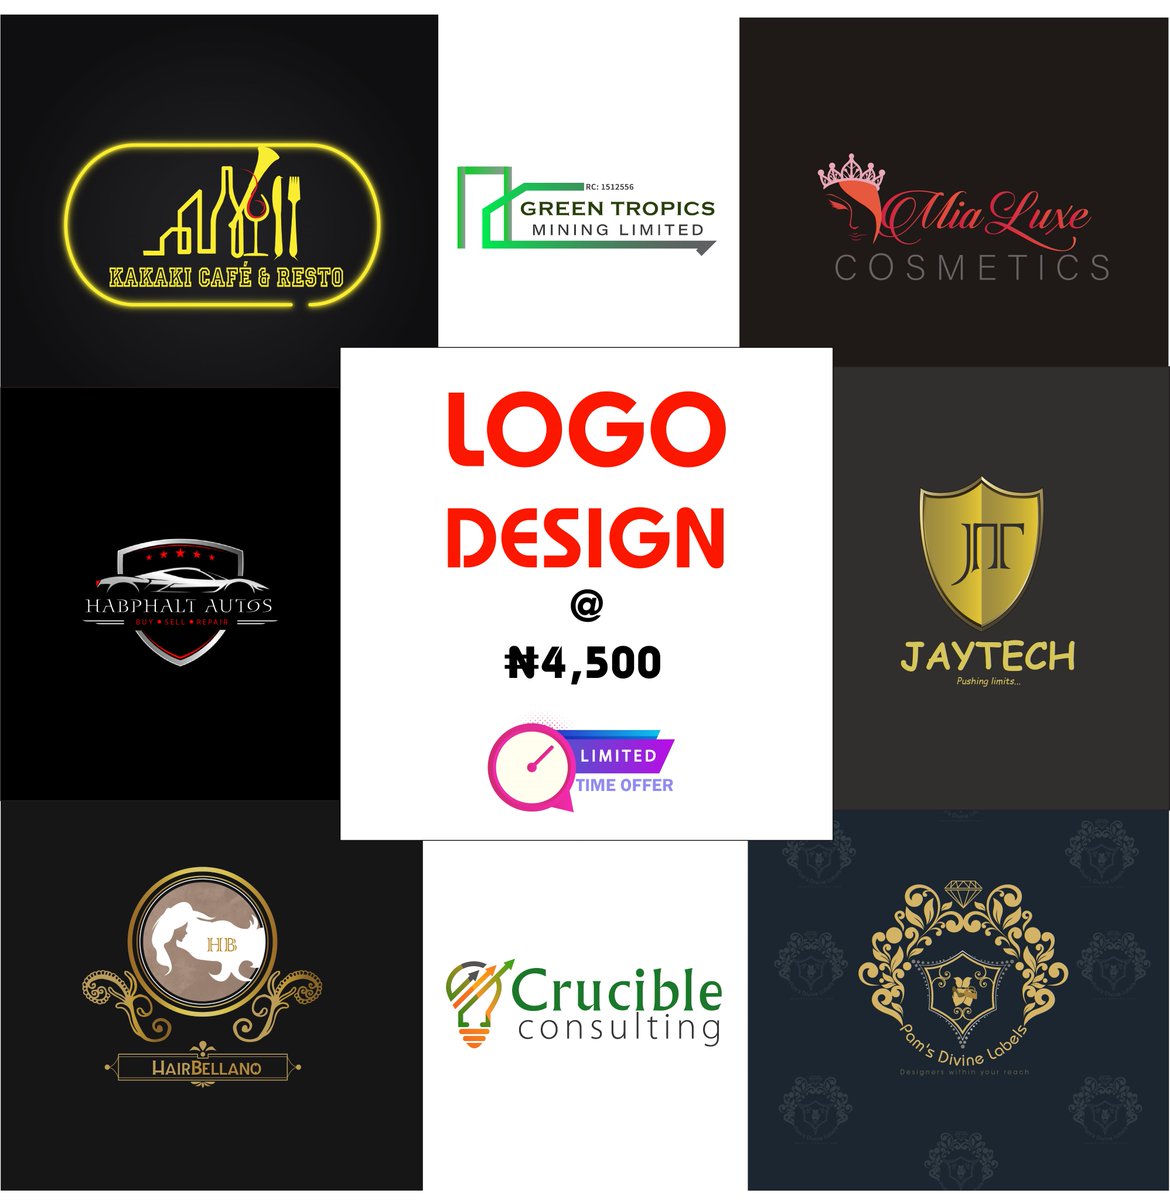 LIMITED TIME OFFER!NEED A LOGO FOR YOUR COMPANY OR BRAND? DON'T WORRY WE HAVE YOU COVERED!Click link  http://wa.me/2348022238131  or send a DM to get started.